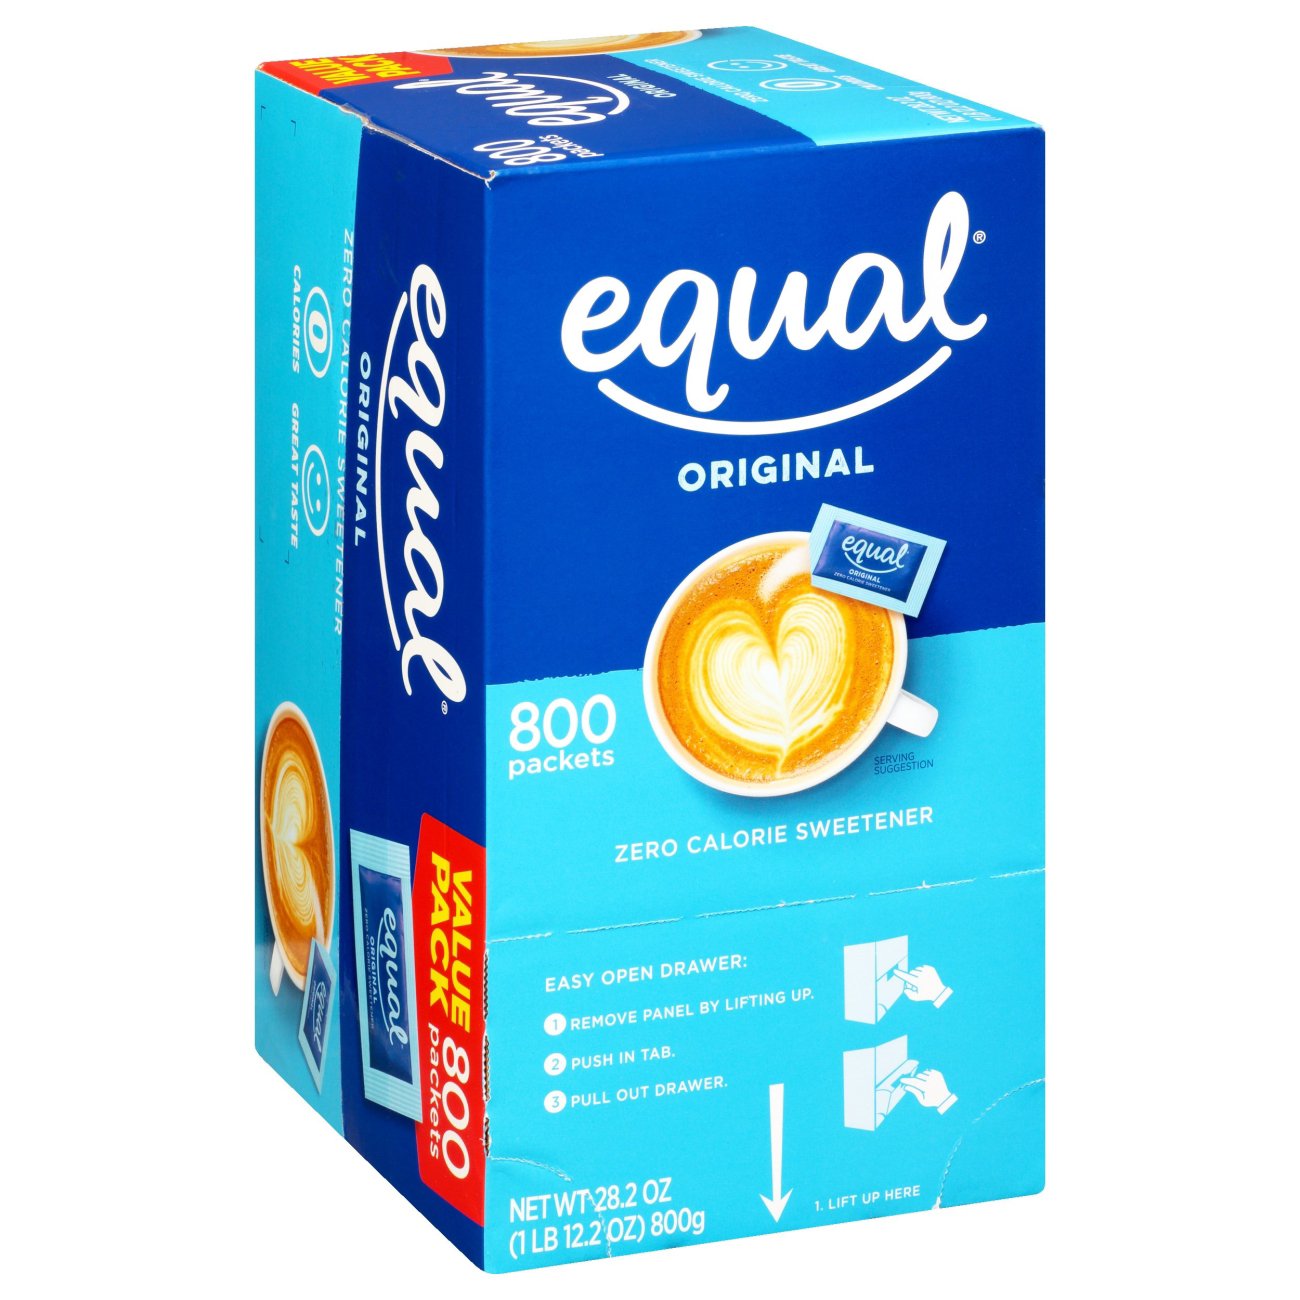 equal packet